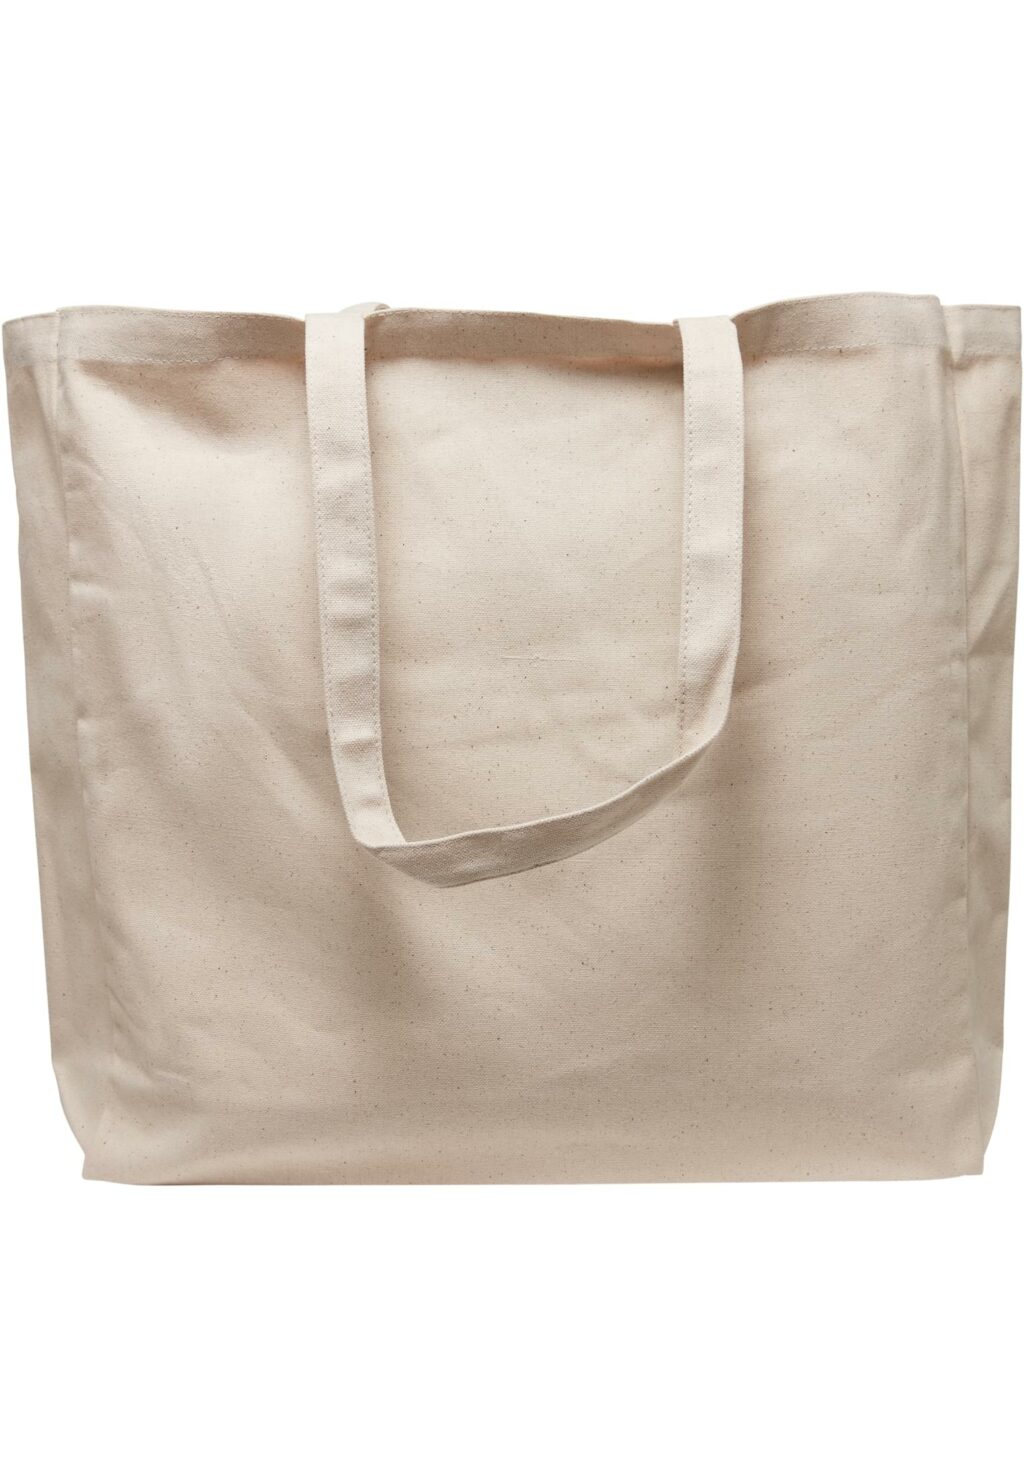 Sorry Oversize Canvas Tote Bag offwhite one MT2285